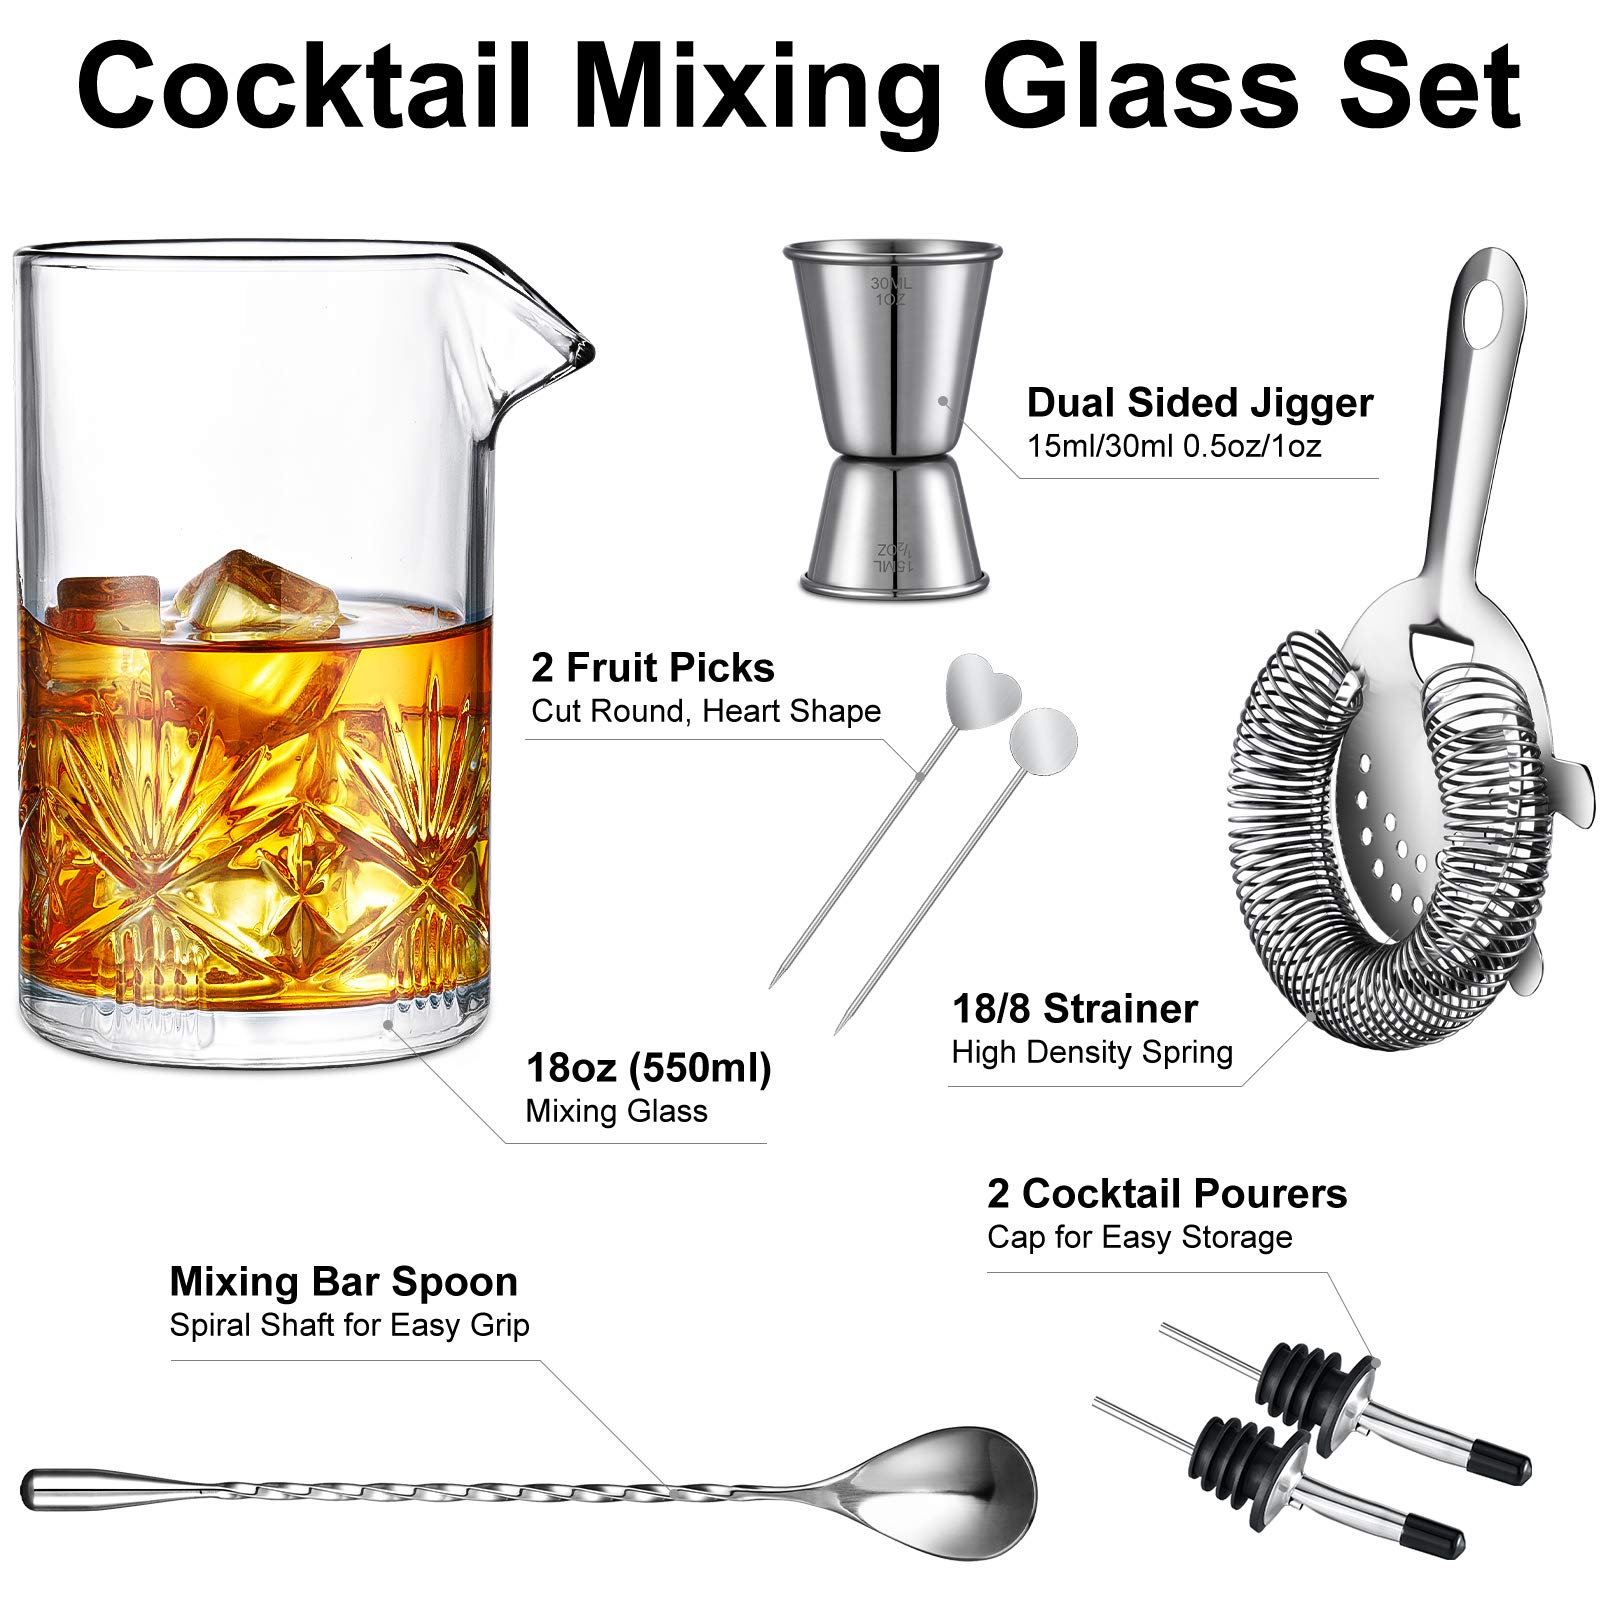 Cocktail Mixing Glass, veecom 18oz Crystal Mixing Glass Bartender Kit, 8 Piece Old Fashioned Cocktail Set with Strainer, Spoon, Jigger, Picks, Pourers, Bar Tools Cocktail Shaker Set (8 Pieces)